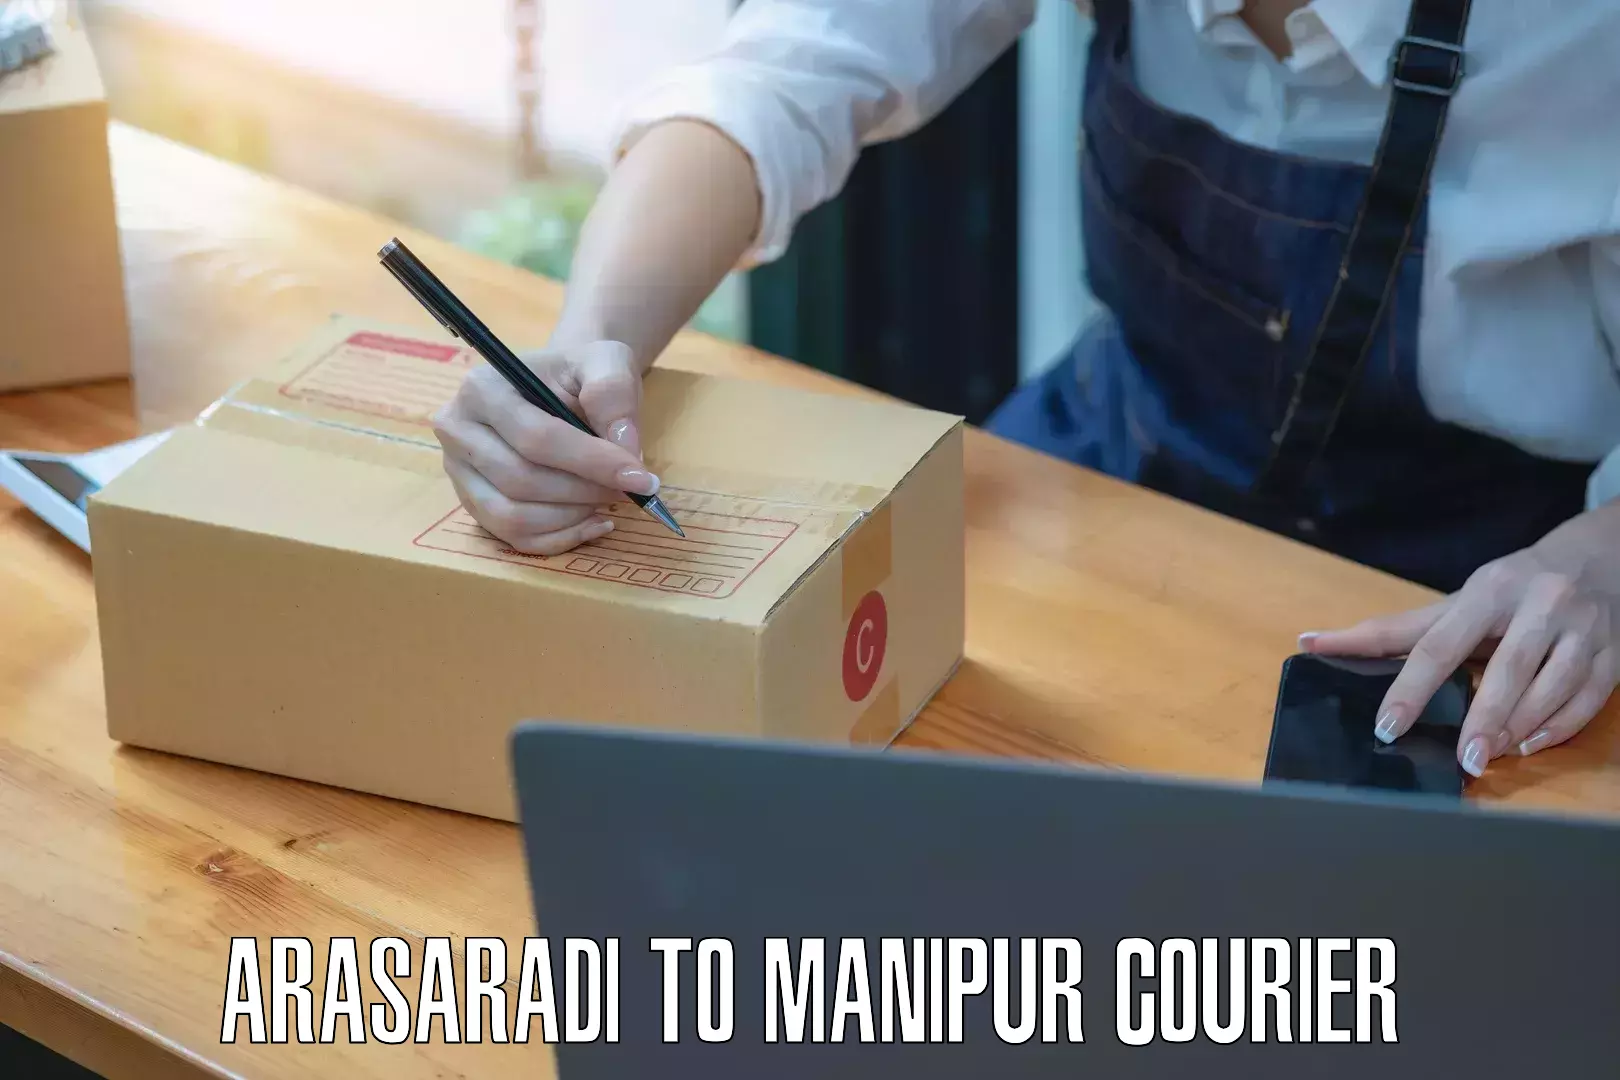 Courier service innovation Arasaradi to Manipur